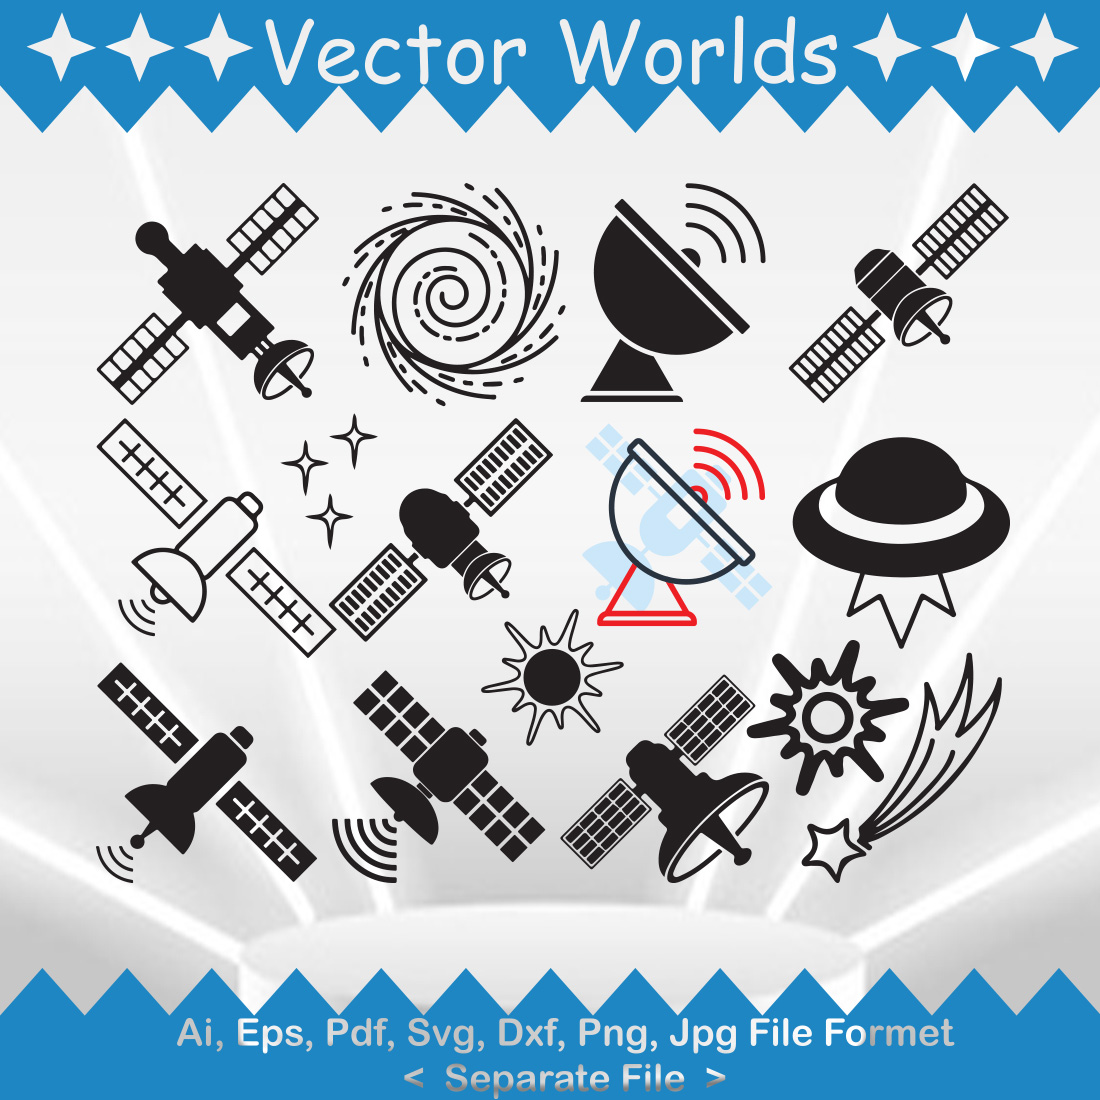 A selection of vector gorgeous images of the silhouettes of a space satellite.